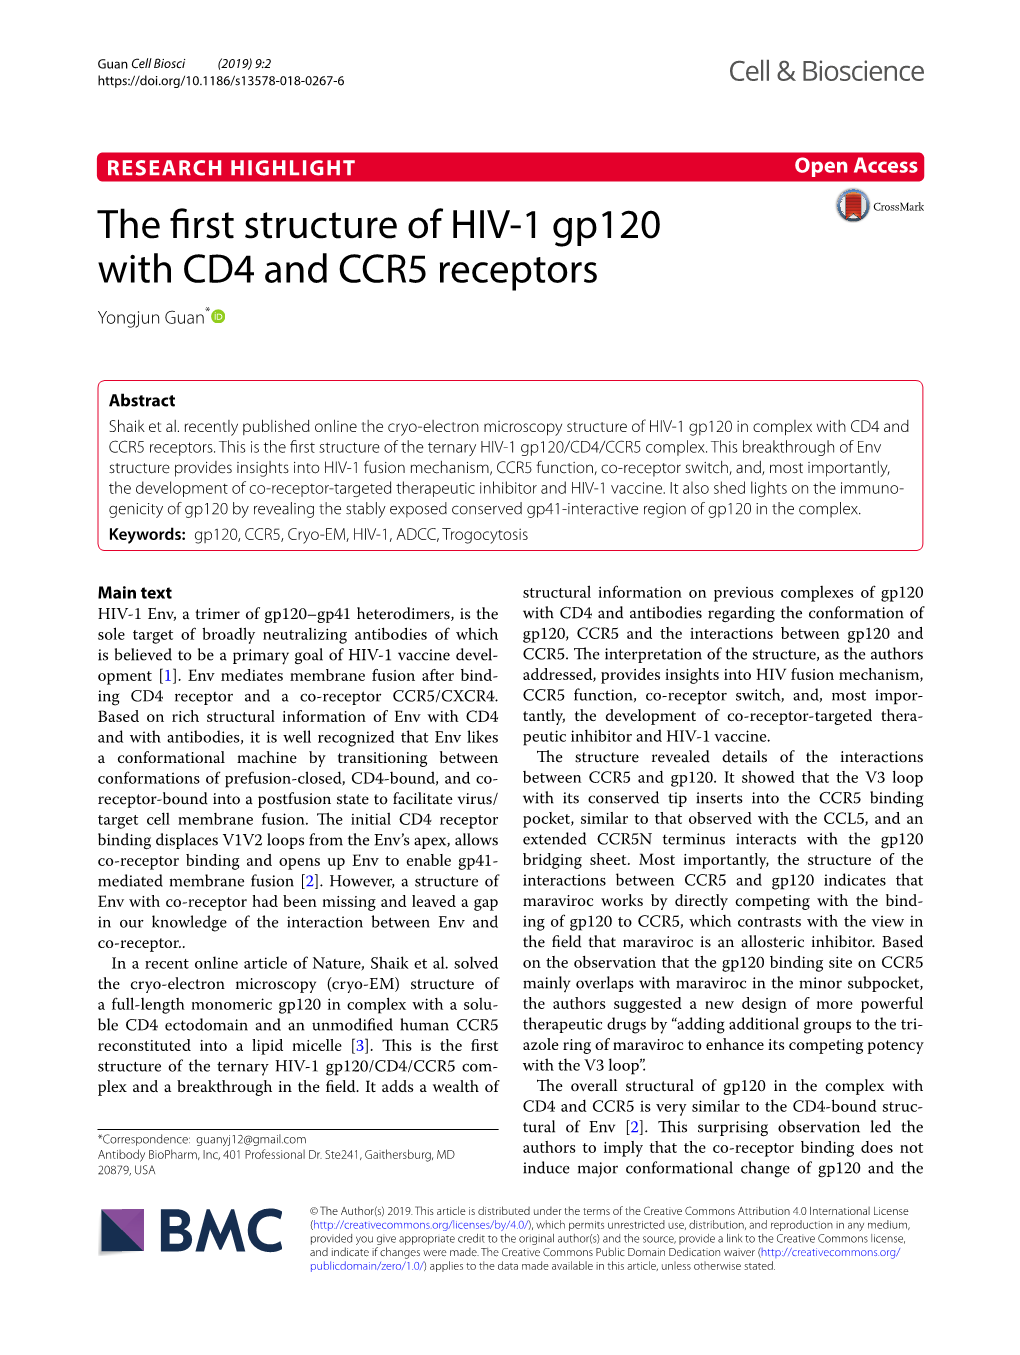 The First Structure of HIV-1 Gp120 with CD4 and CCR5 Receptors